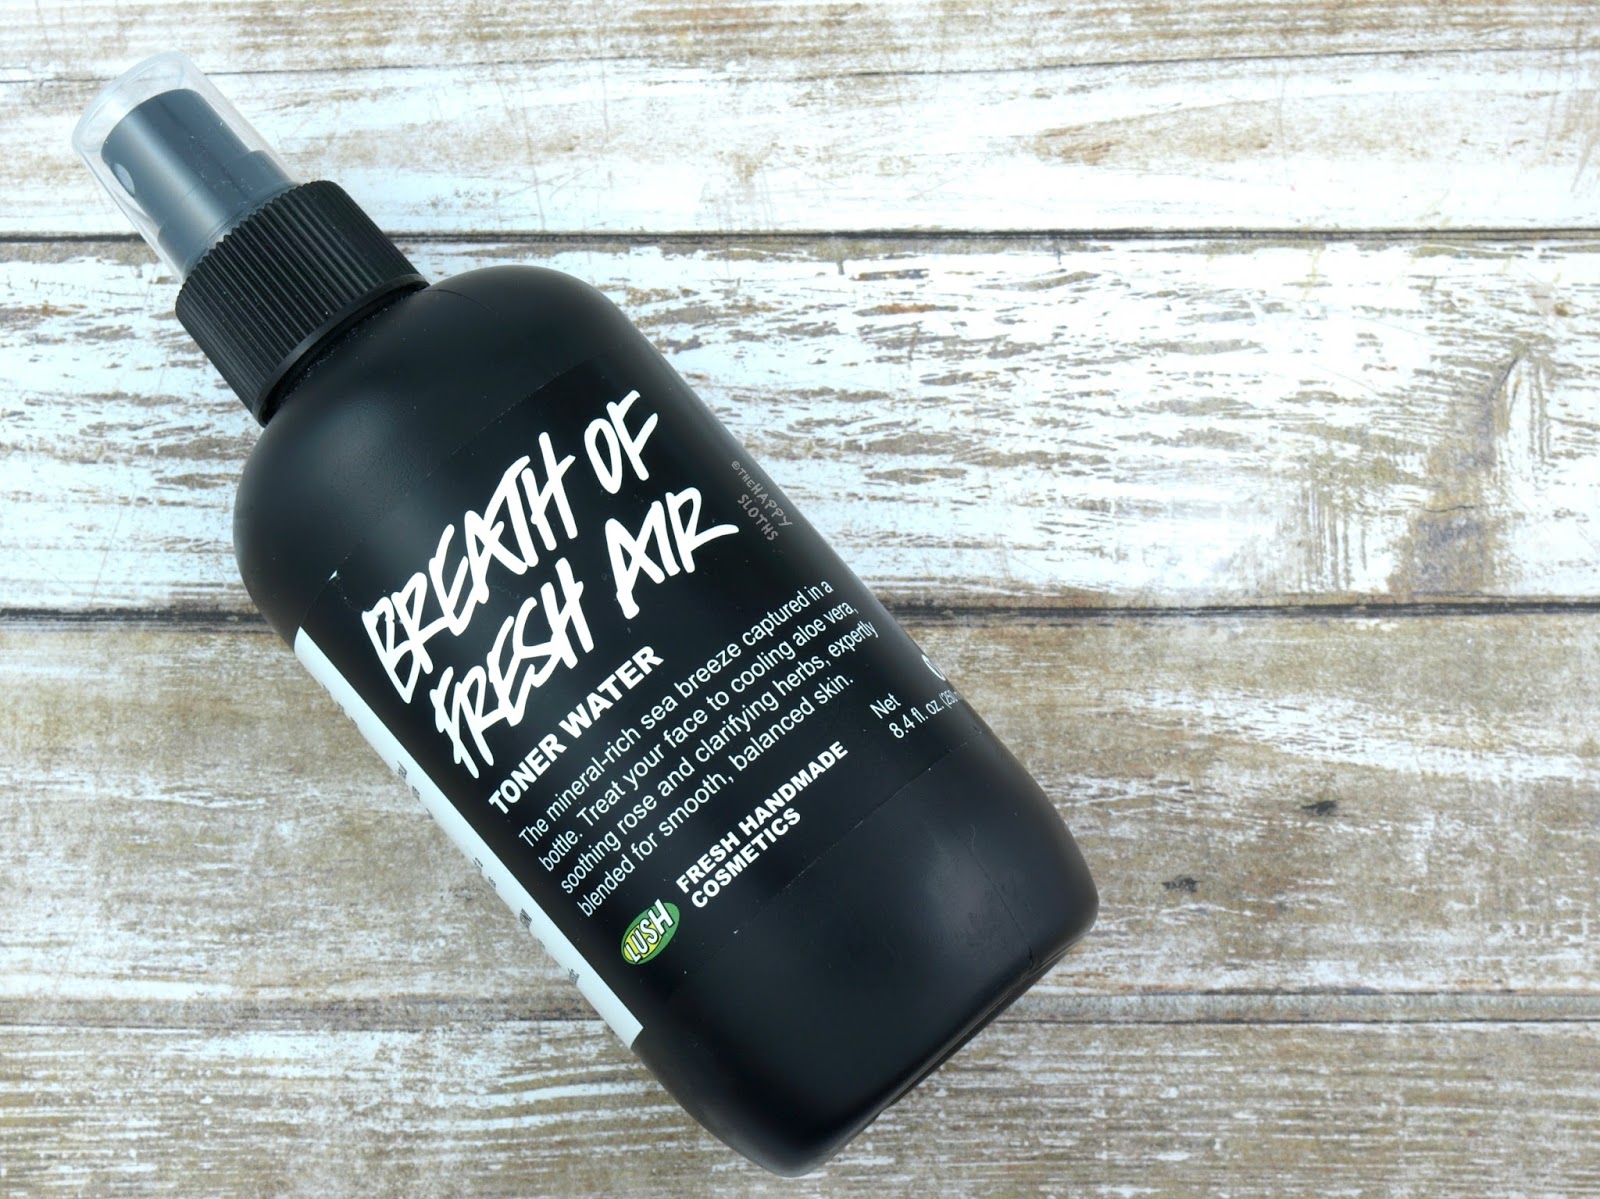 Sea Water | Lush Breath of Fresh Air Toner Water: Review | The Happy Sloths: Beauty, Makeup, and Skincare Blog with Reviews and Swatches